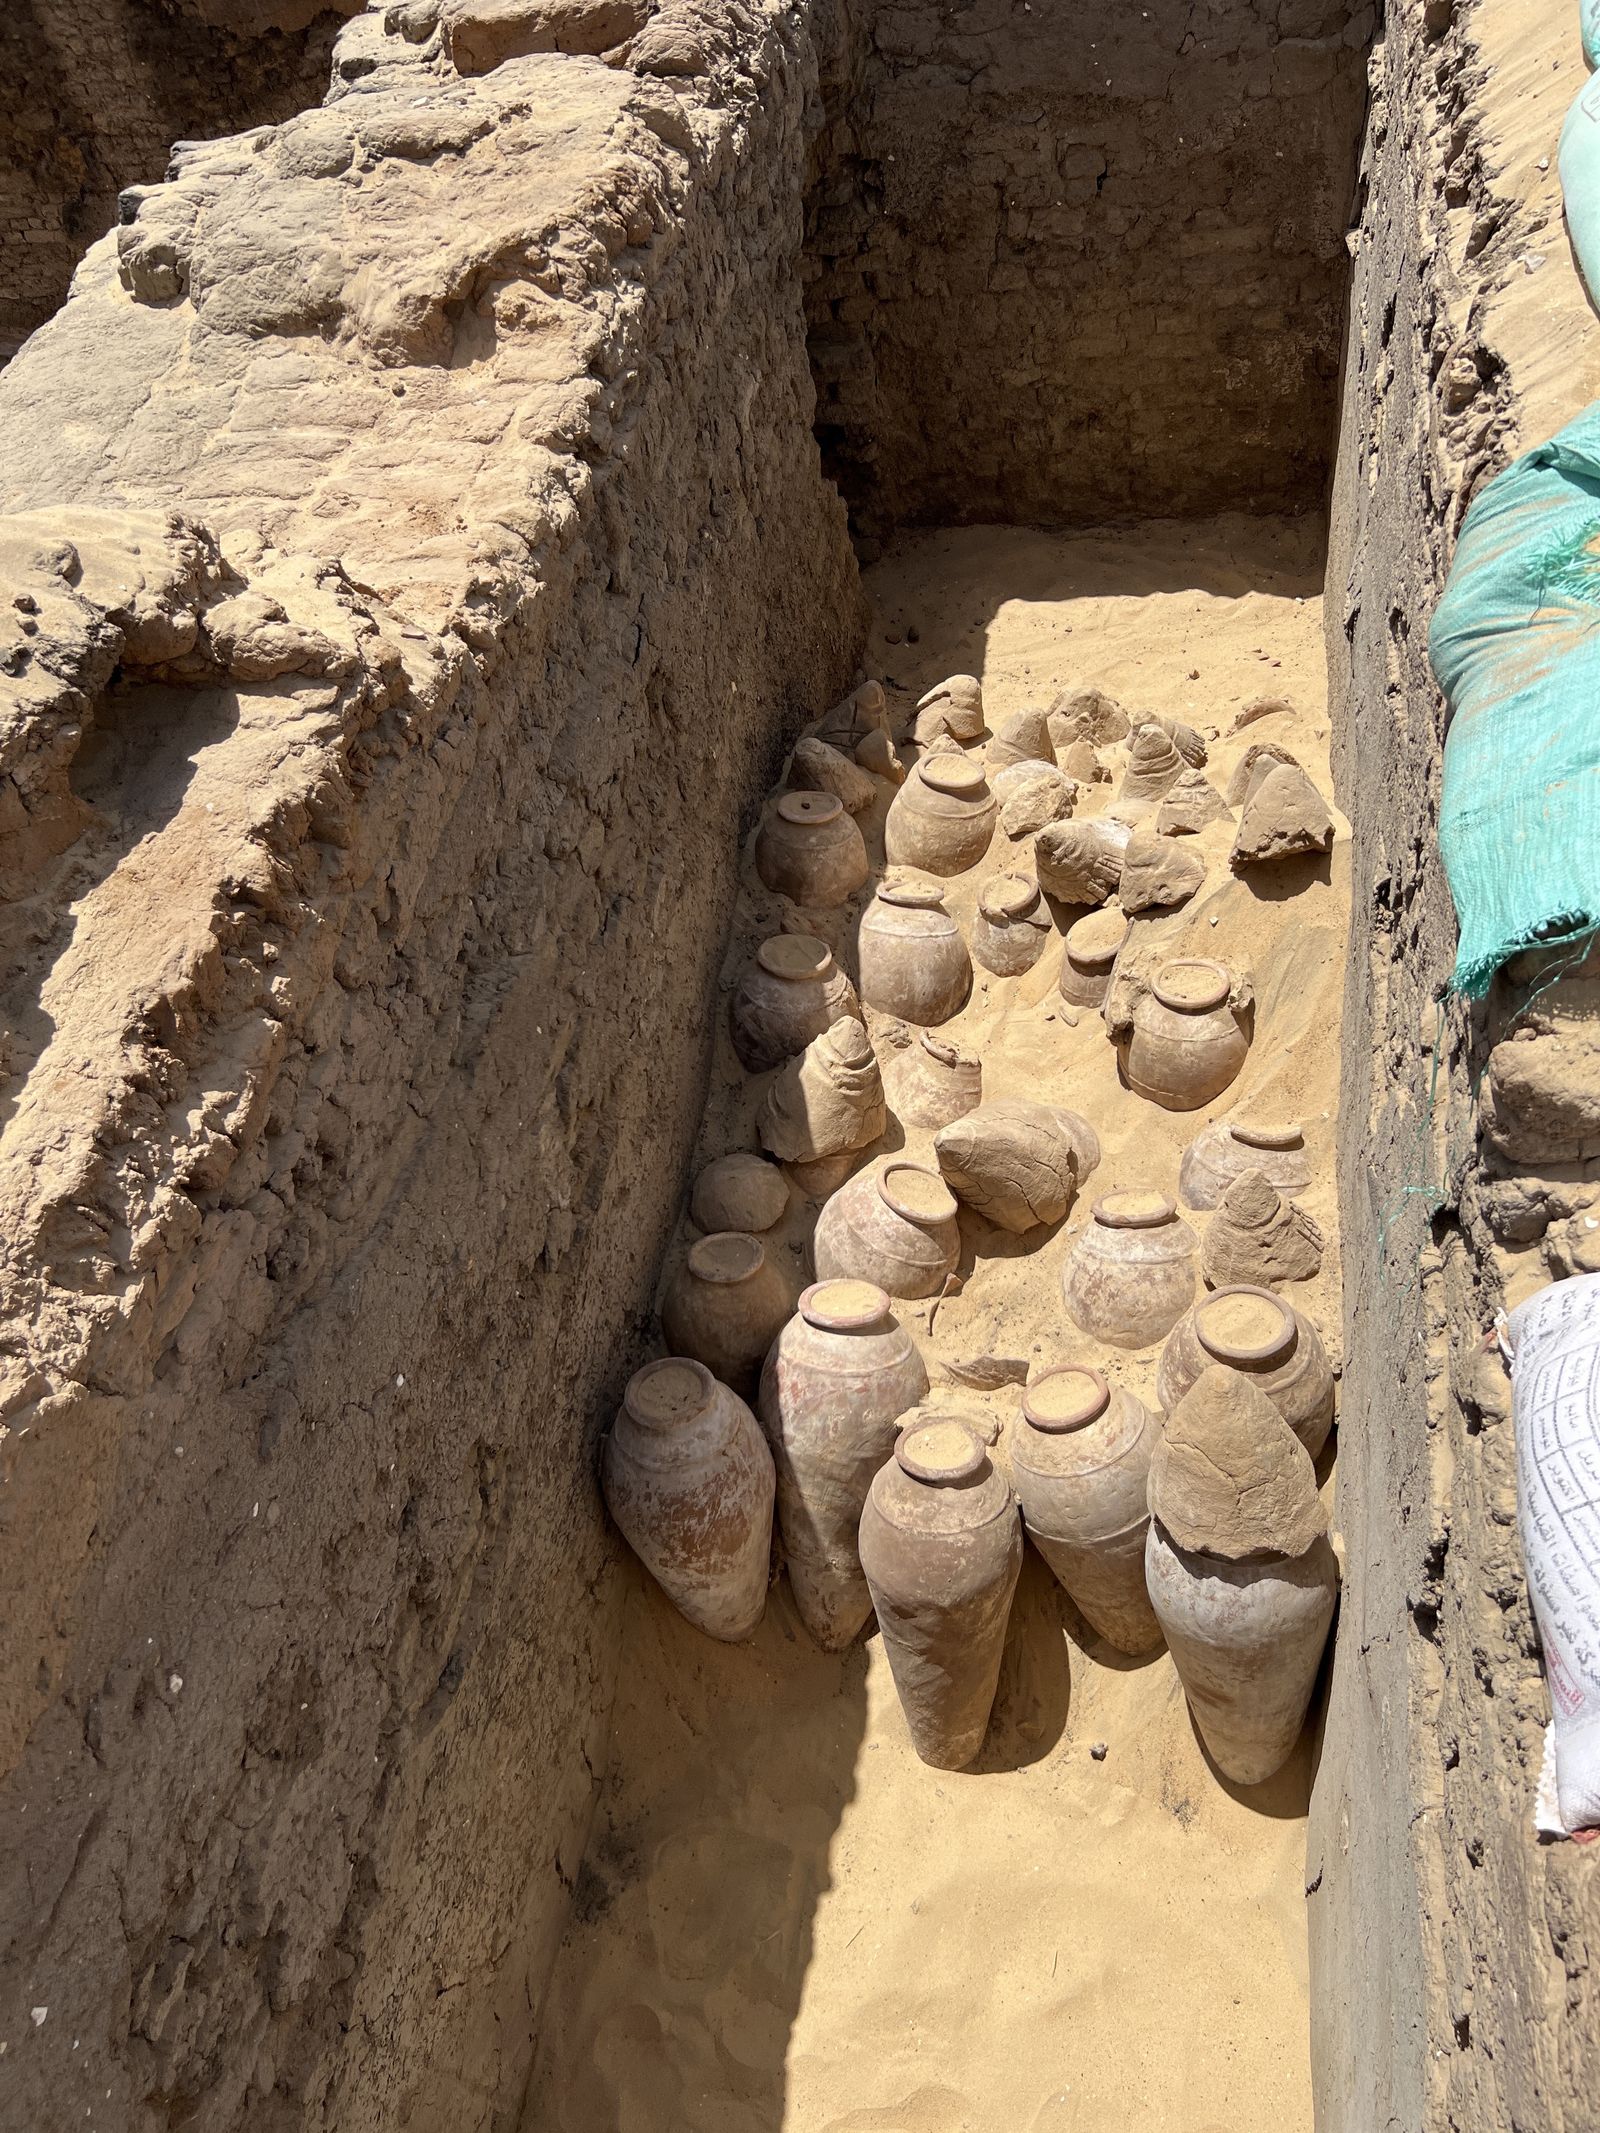 While excavating the tomb of the Egyptian Queen Meret-Neith in Abydos, archaeologists discovered hundreds of 5,000-year-old wine jars. Dig leader Ch